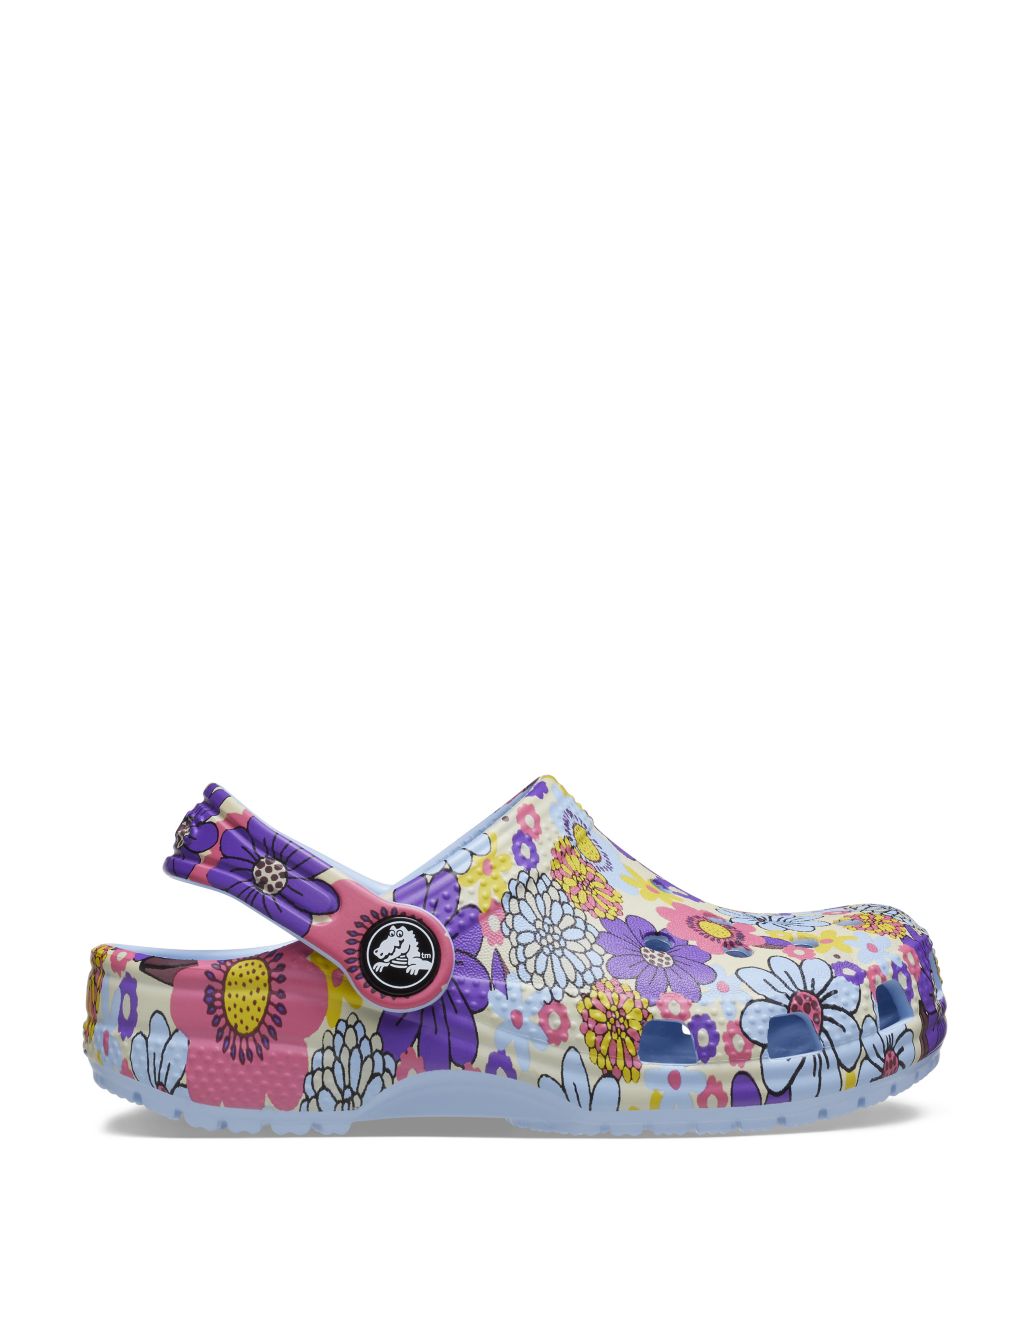 Kids' Classic Retro Floral Clogs (11 Small - 6 Large) image 1